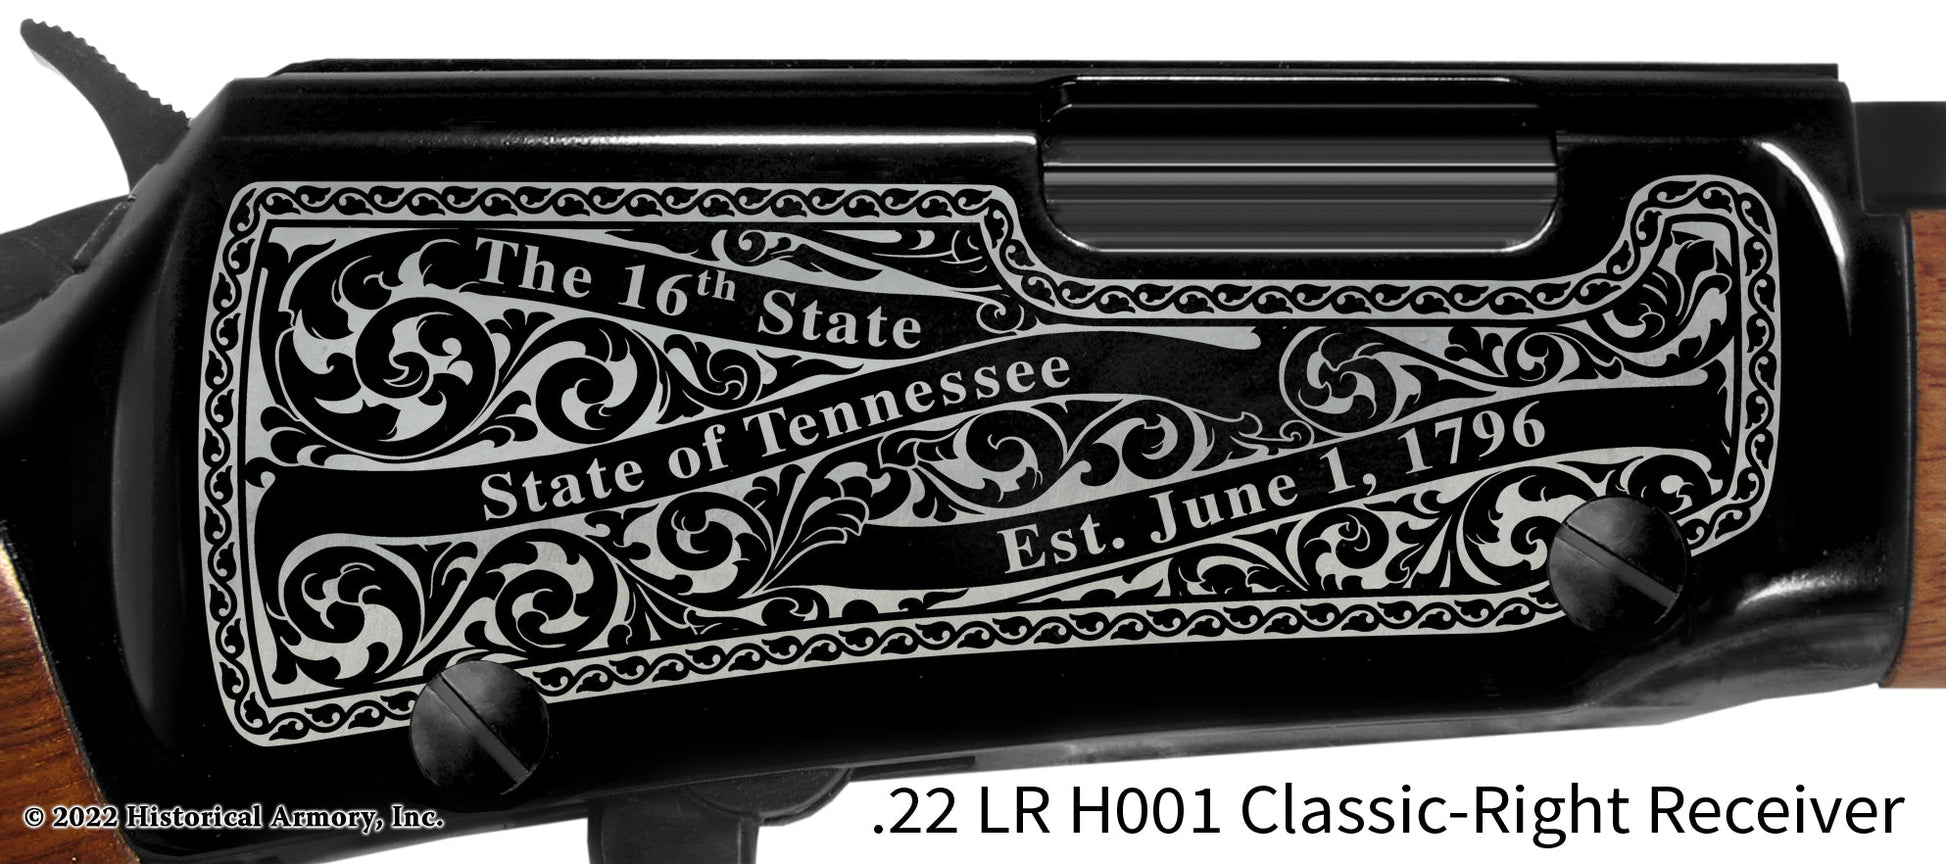 Sevier County Tennessee Engraved Henry H001 Rifle